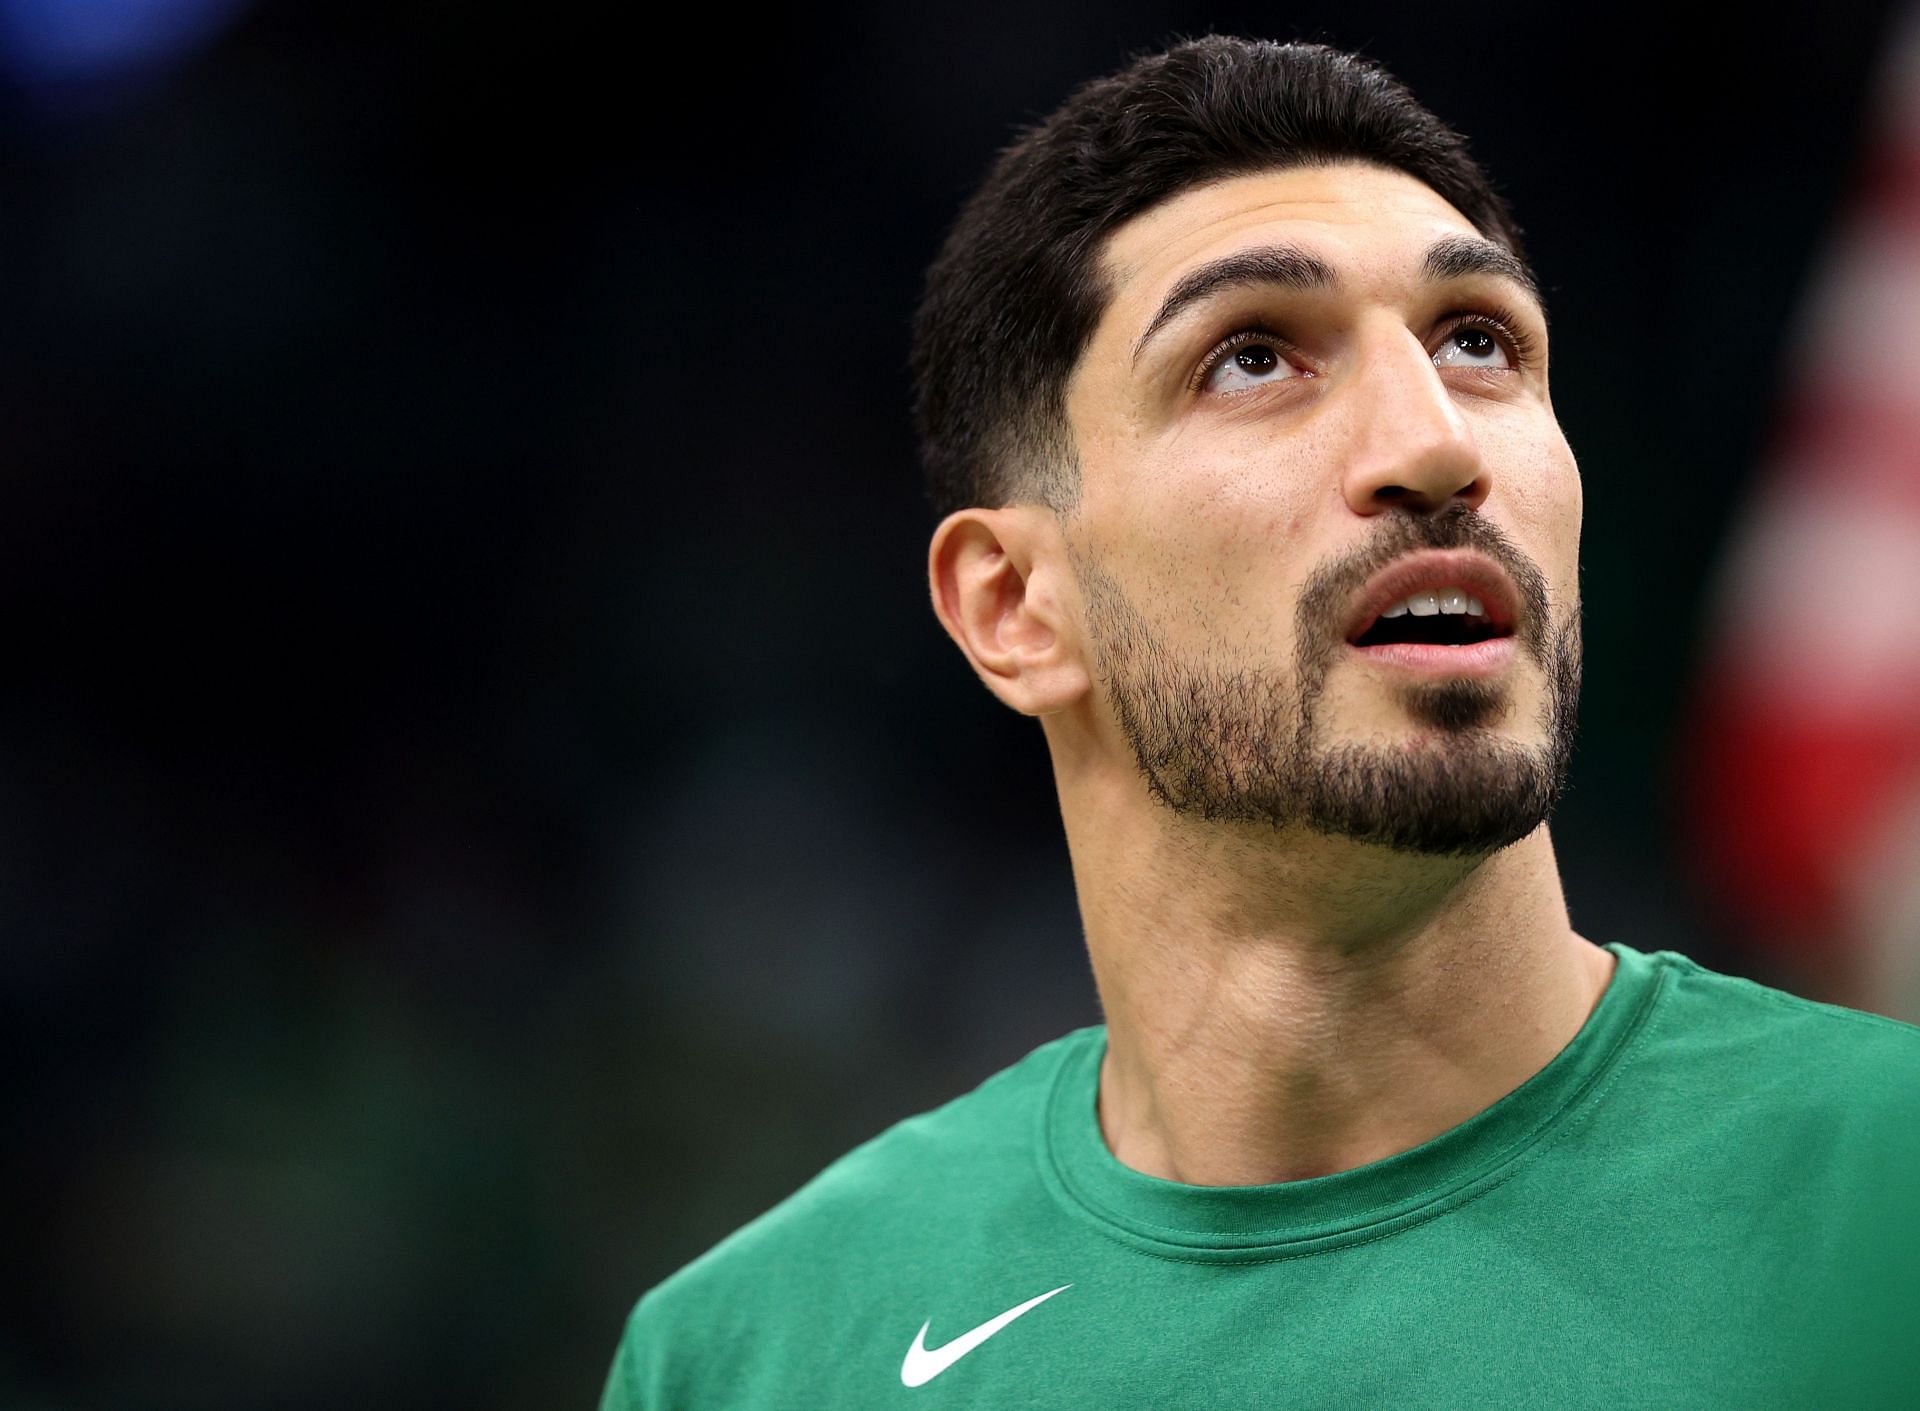 Enes Kanter Freedom and his recent civil rights awareness